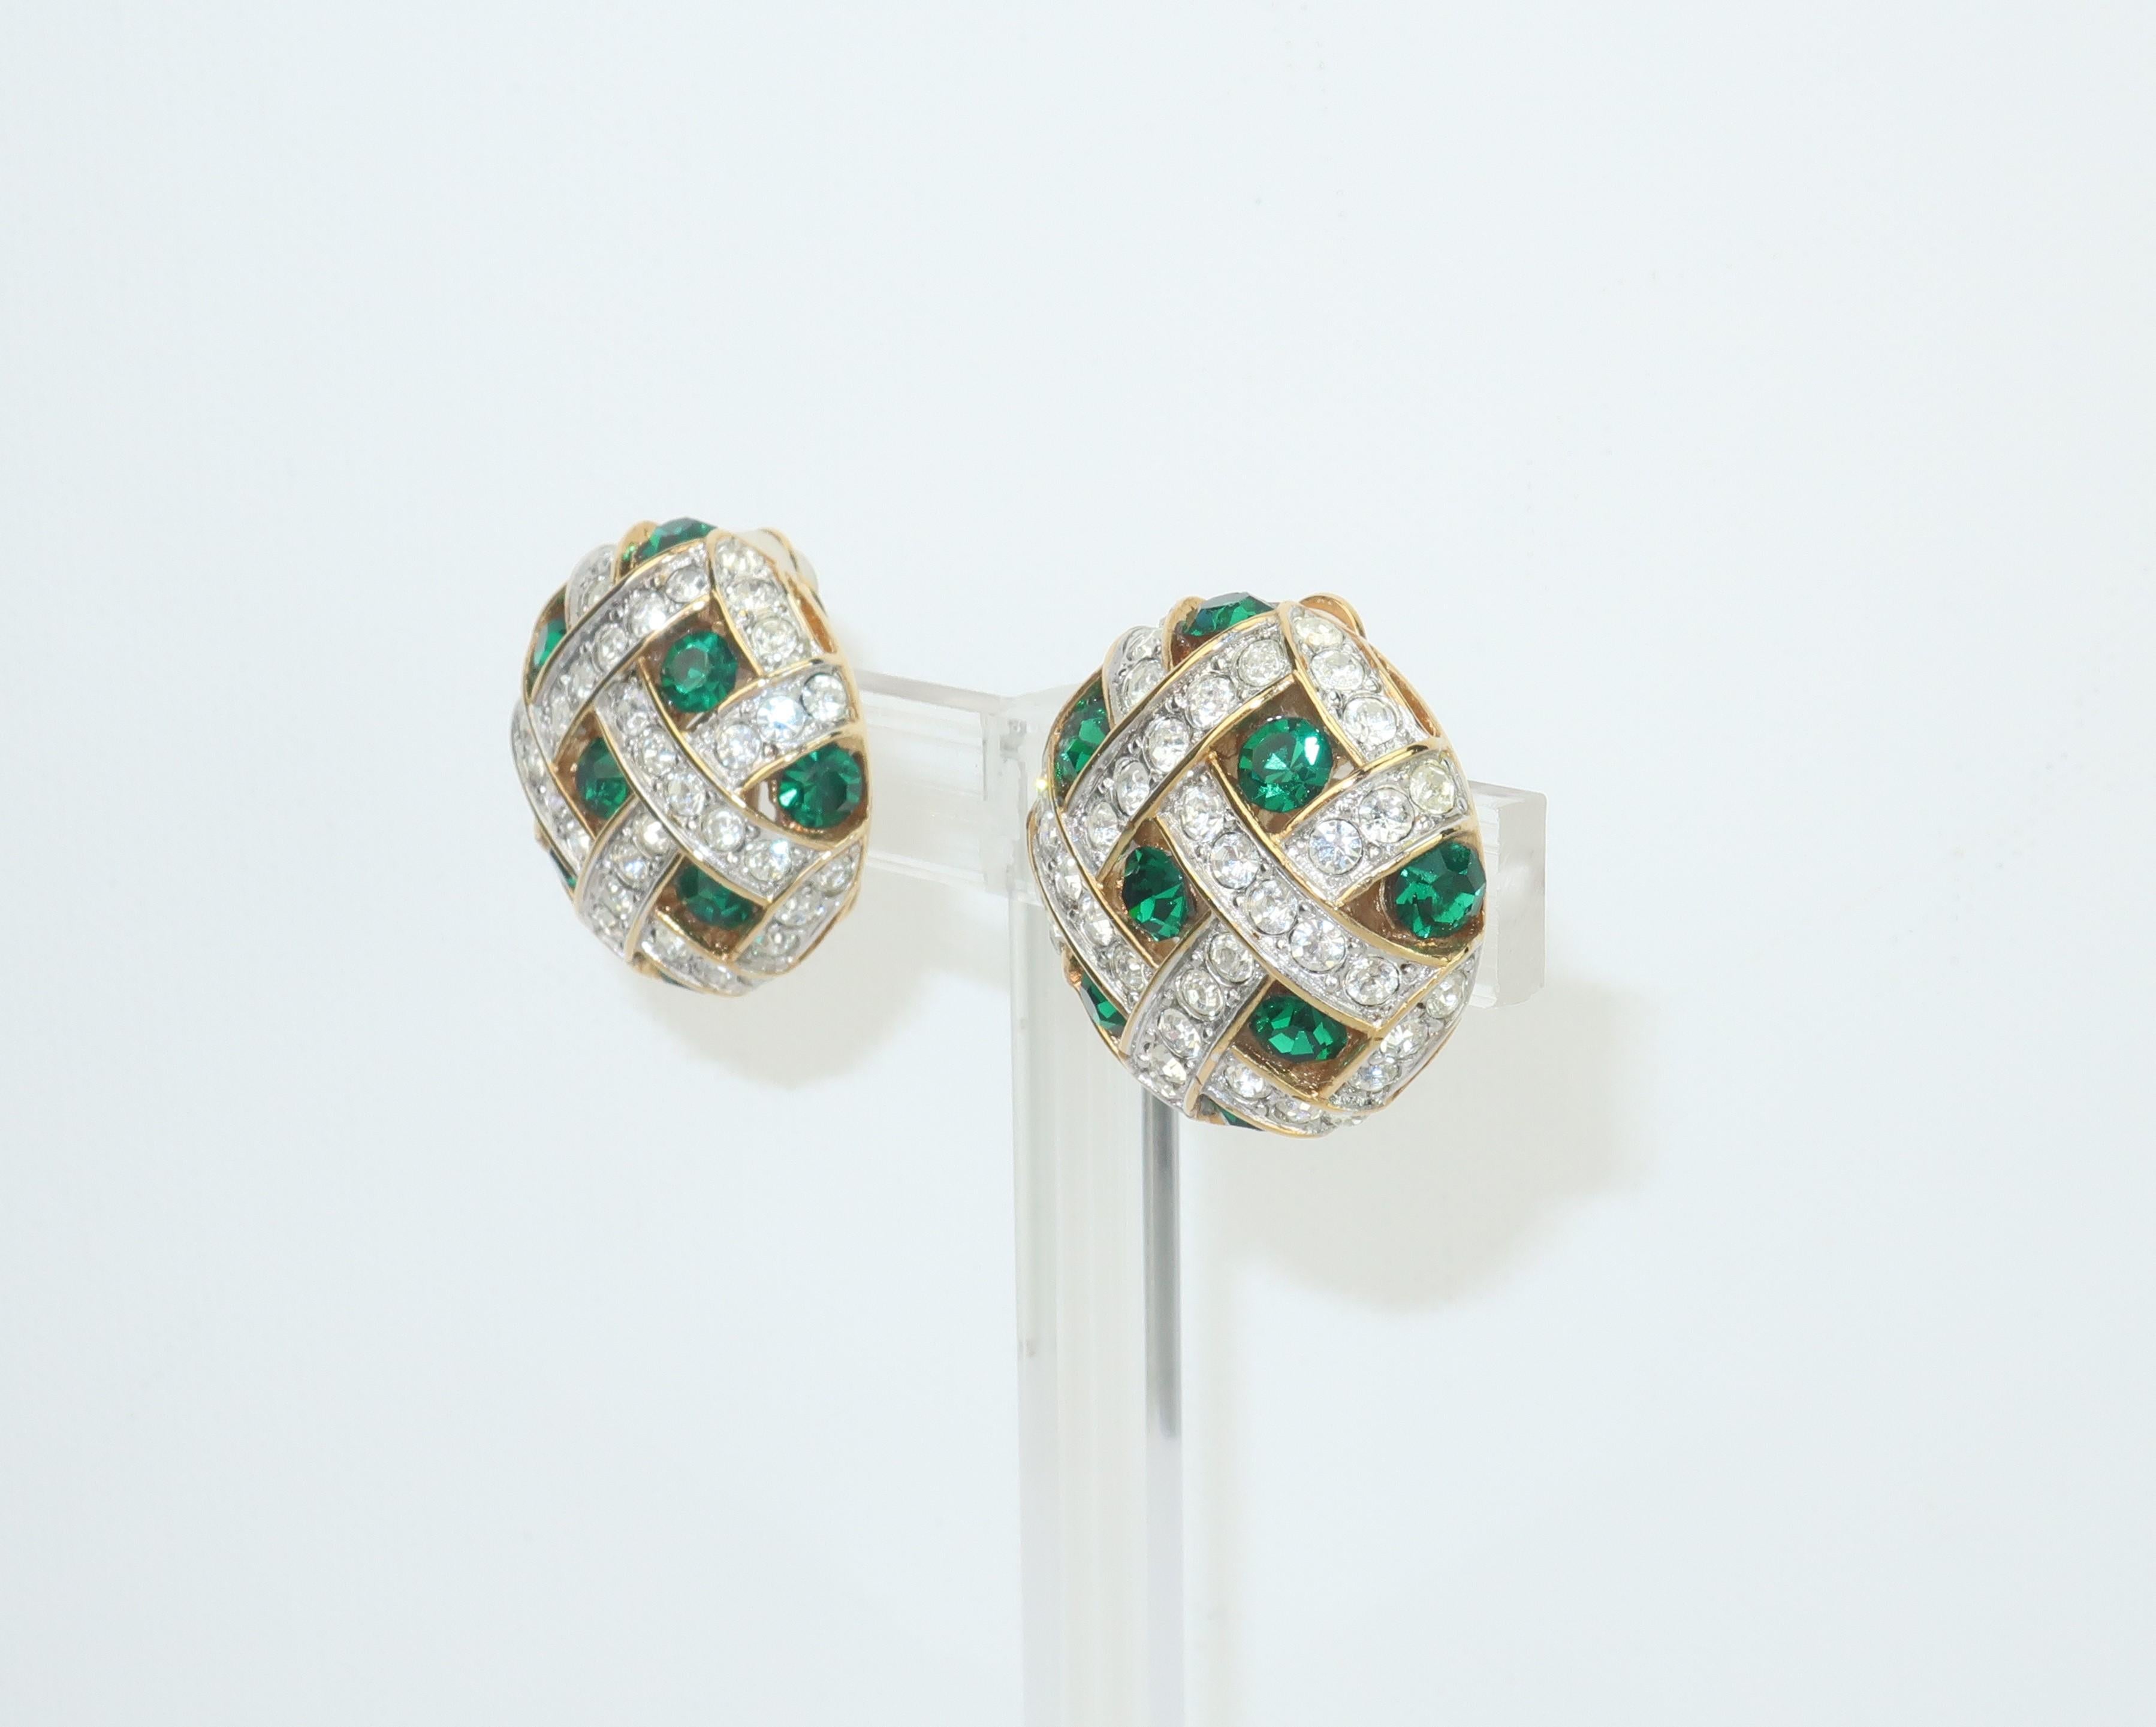 A beautiful pair of round green and crystal rhinestone earrings with a gold tone lattice style setting.  The clip on hardware includes rubber pads.  No apparent hallmark though well made with quality details.
CONDITION
Very good condition with some